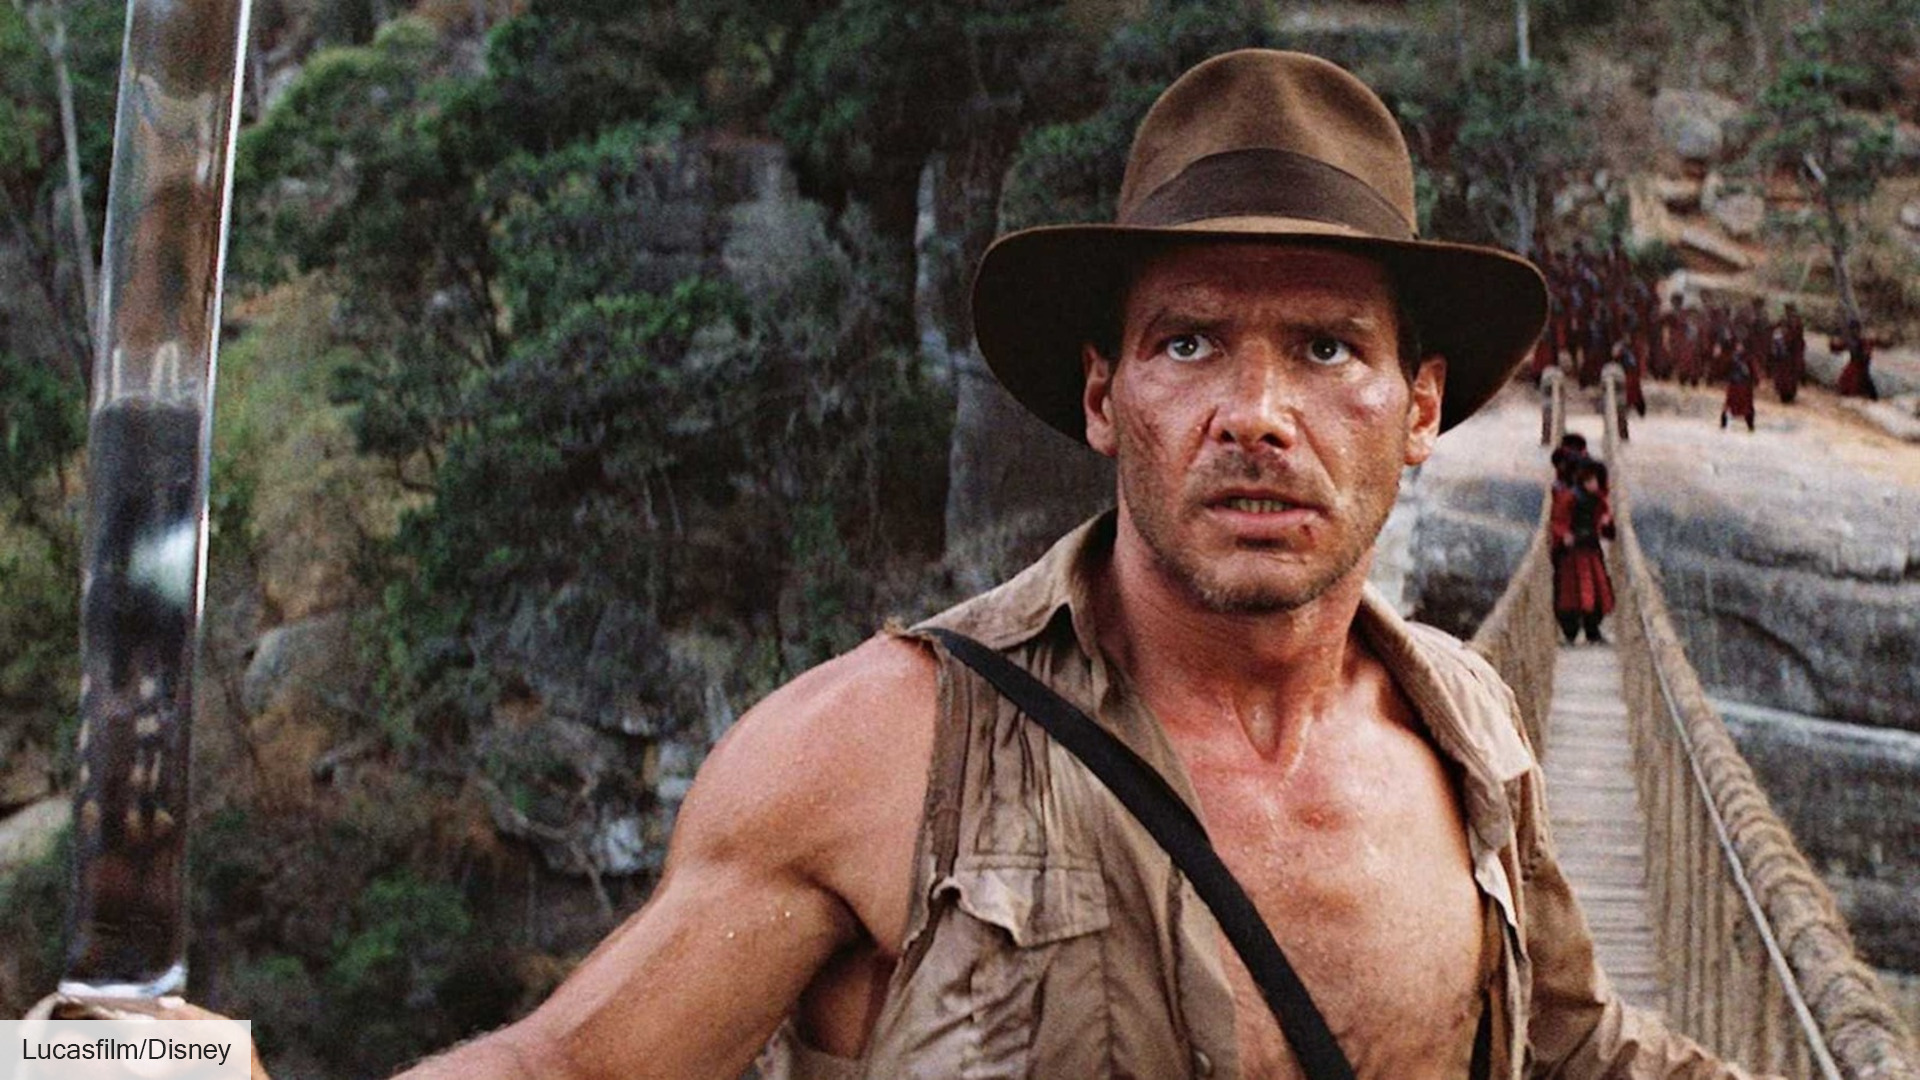 Indiana Jones 5 release date: Harrison Ford in Legend of the Crystal Skull